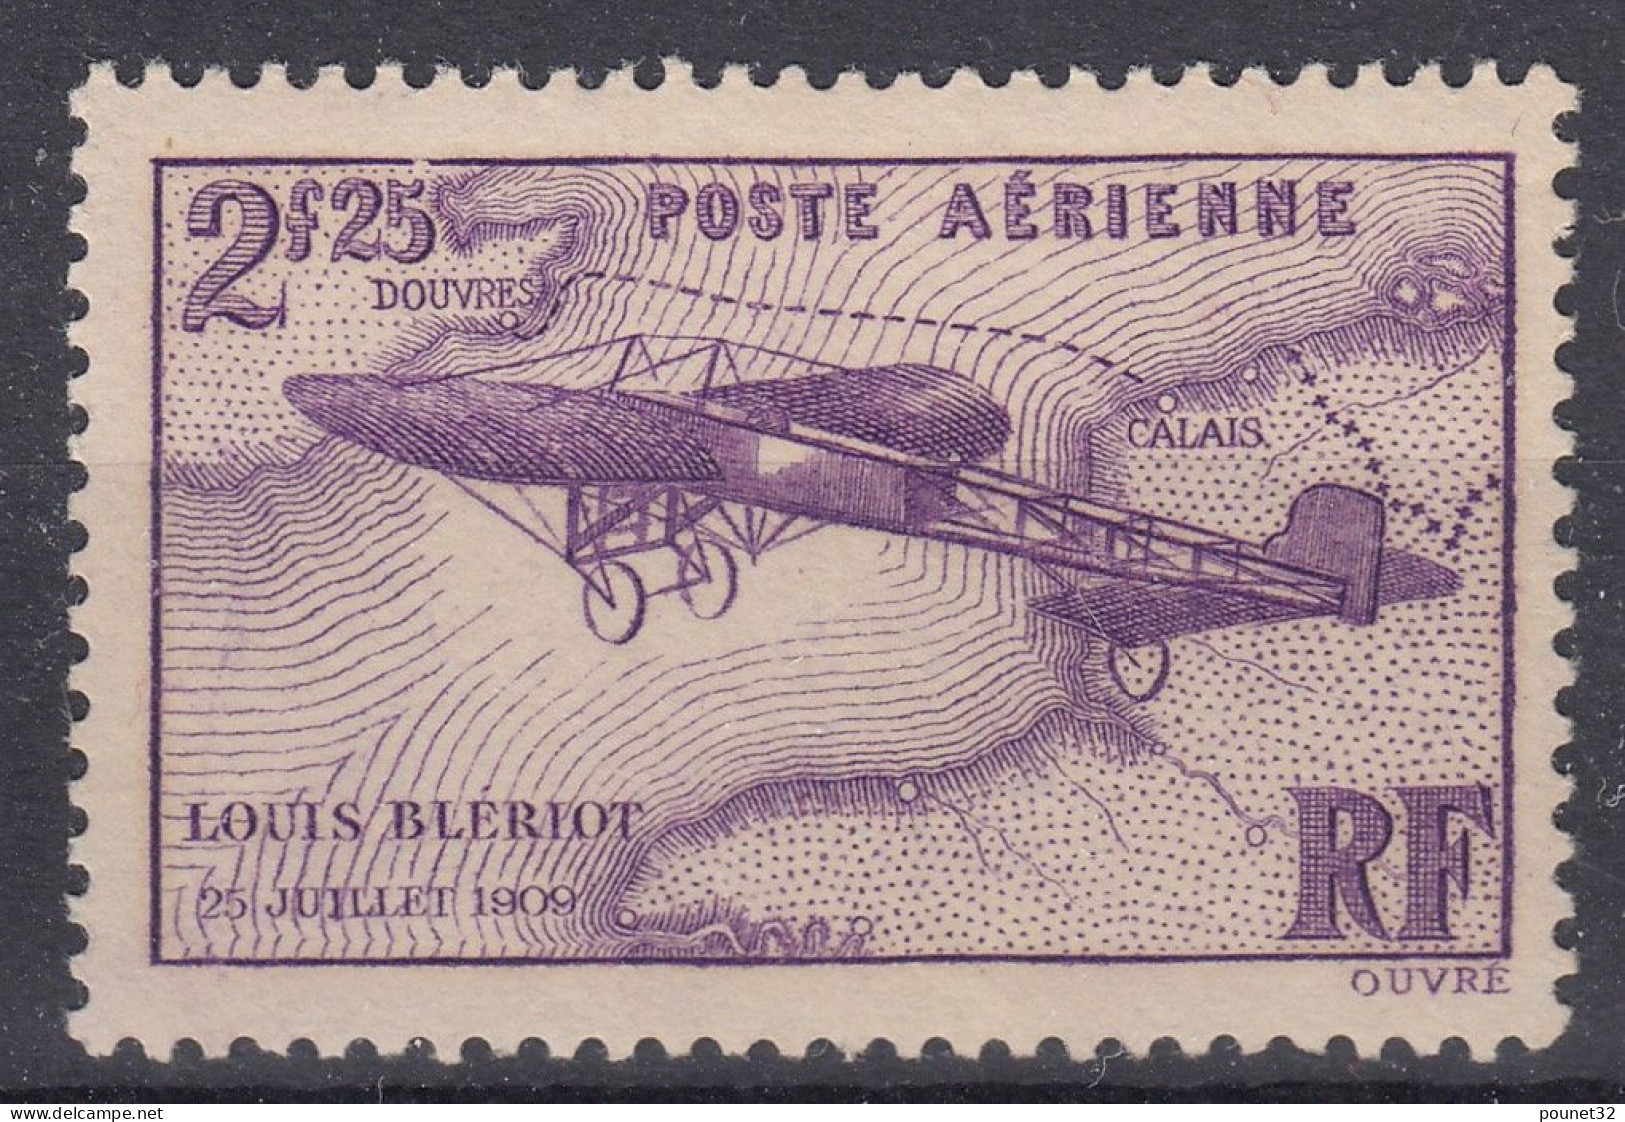 TIMBRE FRANCE POSTE AERIENNE BLERIOT N° 7 NEUF ** GOMME SANS CHARNIERE - A VOIR - 1927-1959 Mint/hinged